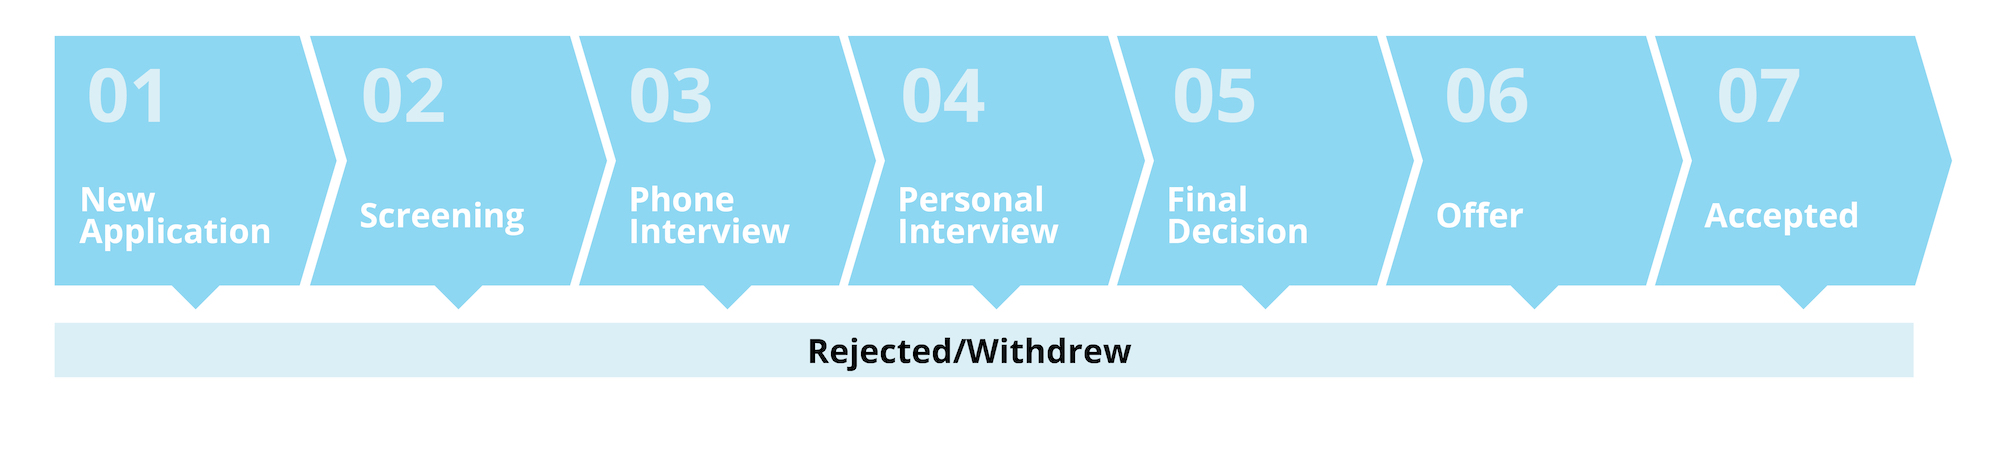 Recruiting-Process-Graphic_nl.png